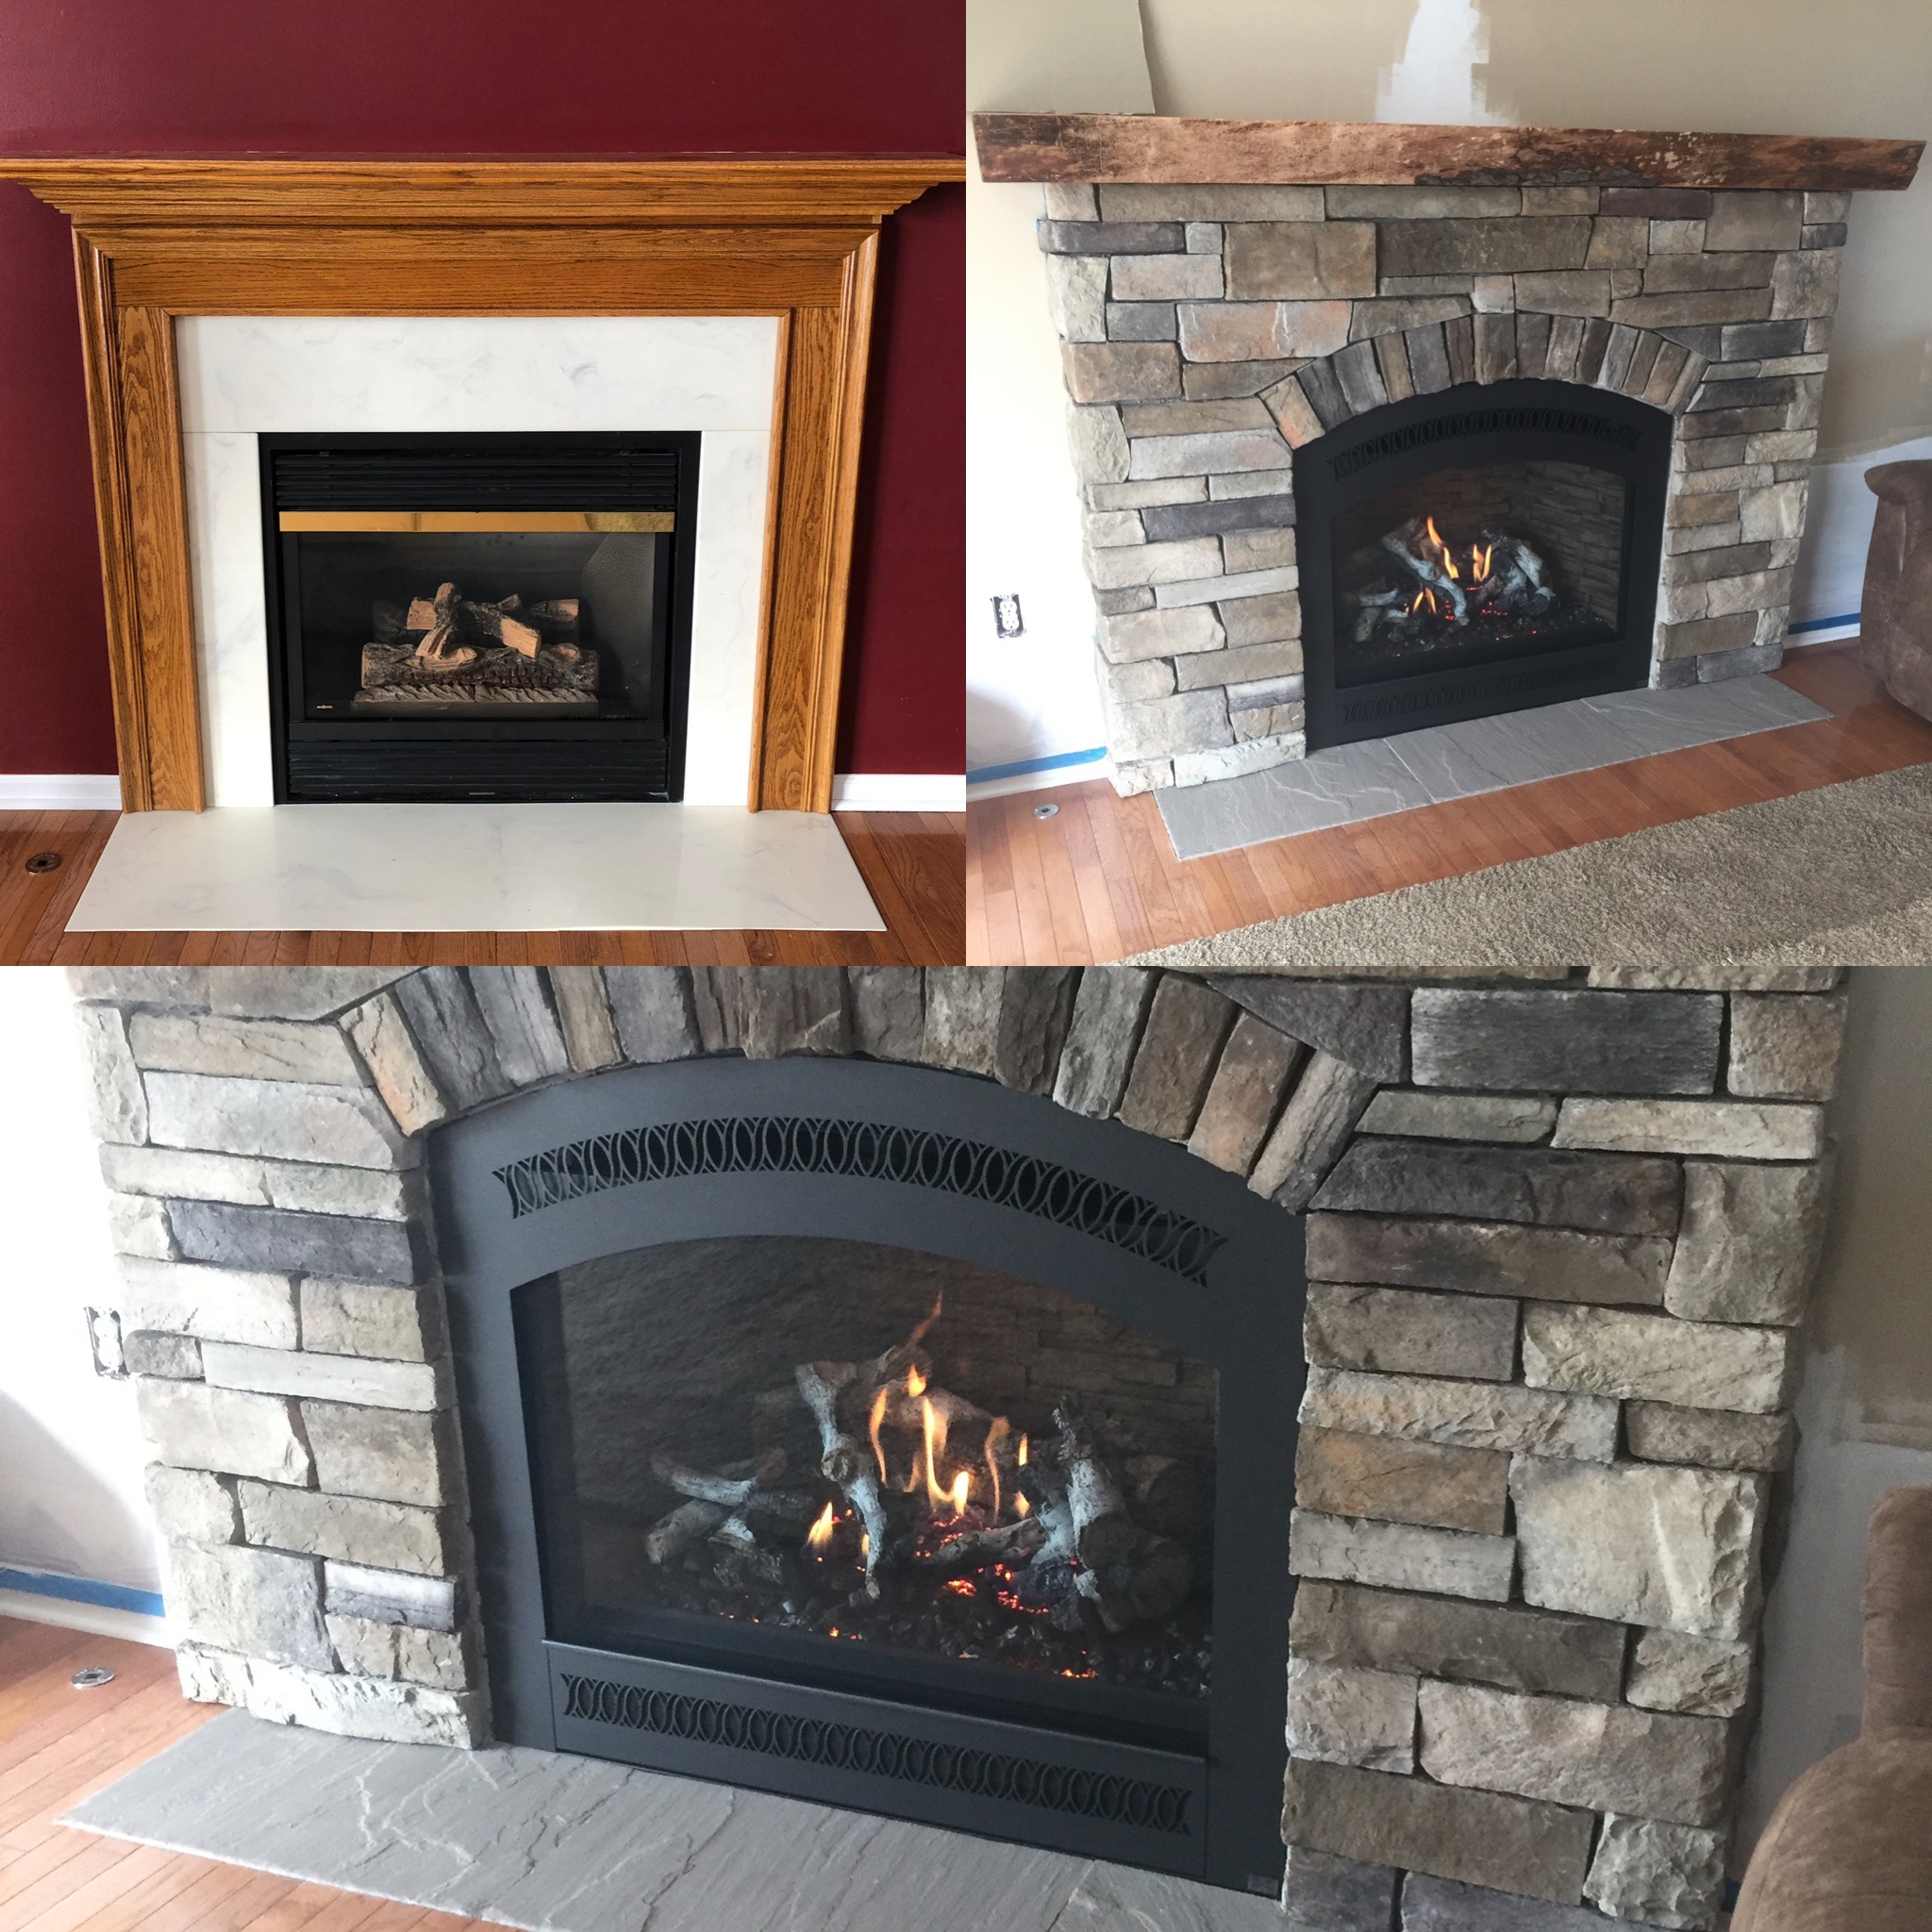 Image of a traditional 864TRV by Fireplace Xtordinair and the preexisting gas fireplace as the before.